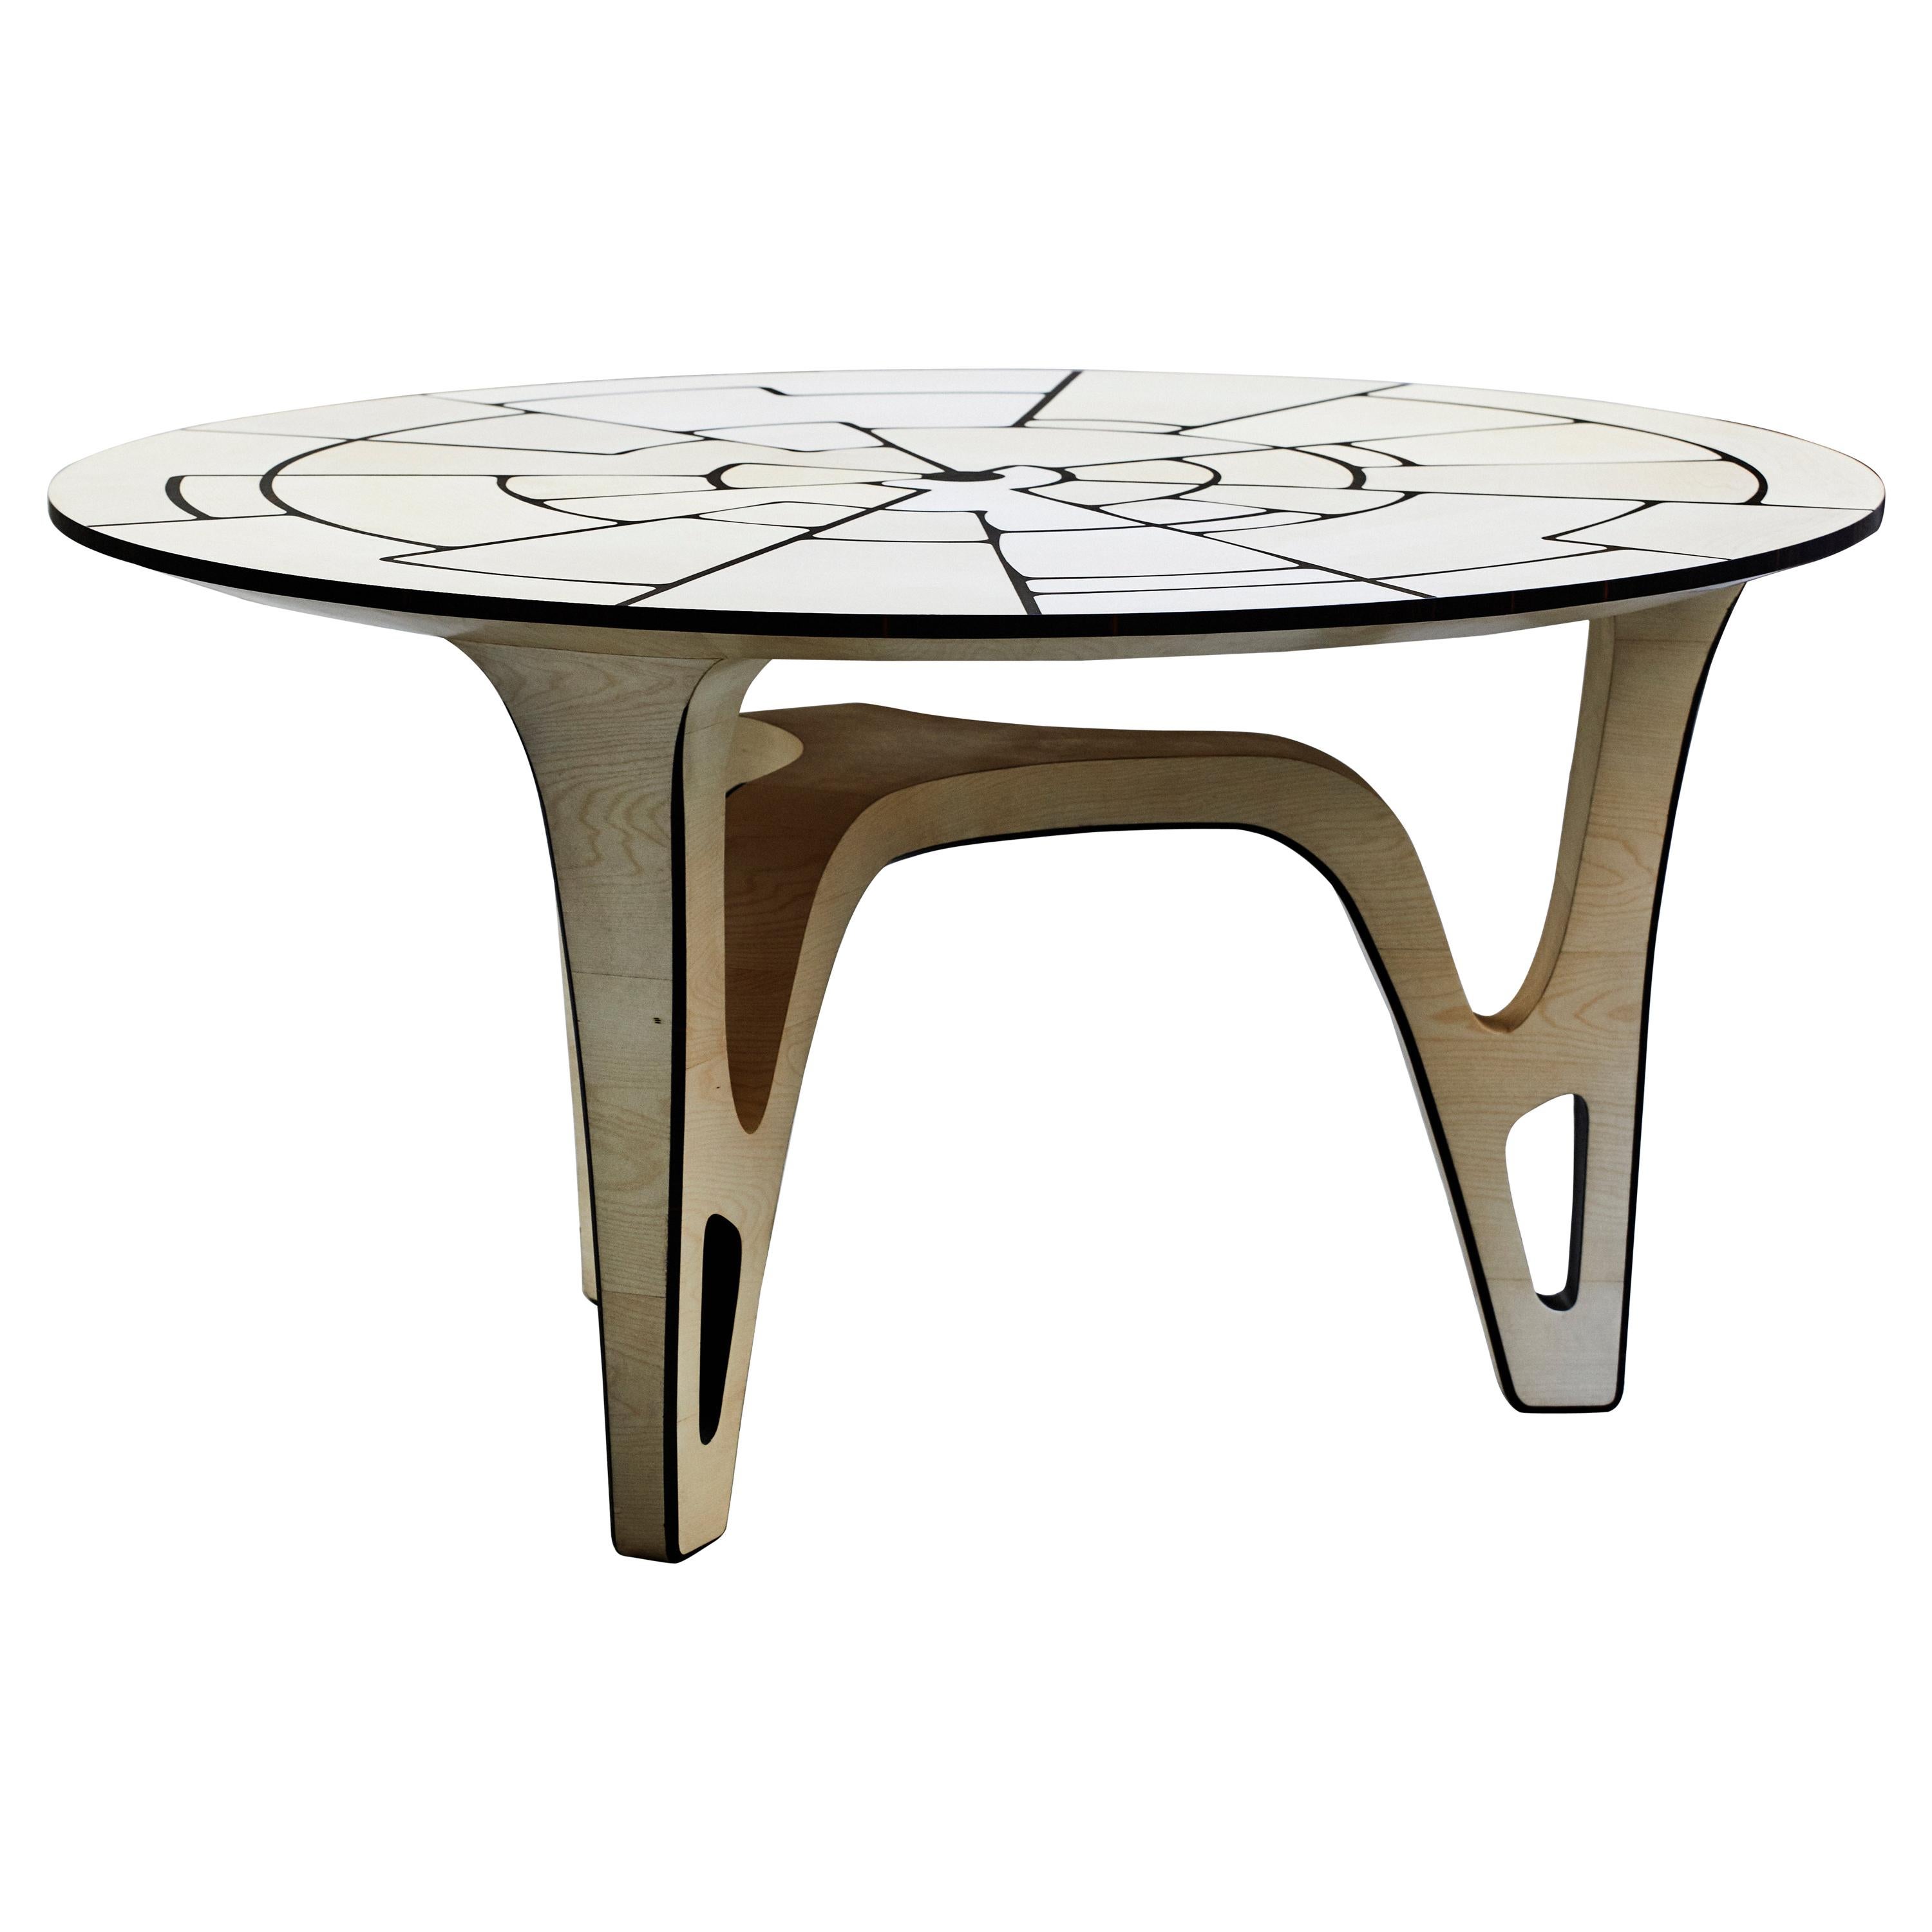 "The Secret Garden" 21st Century Round Table, Maple and Ebony by Ivan Paradisi For Sale